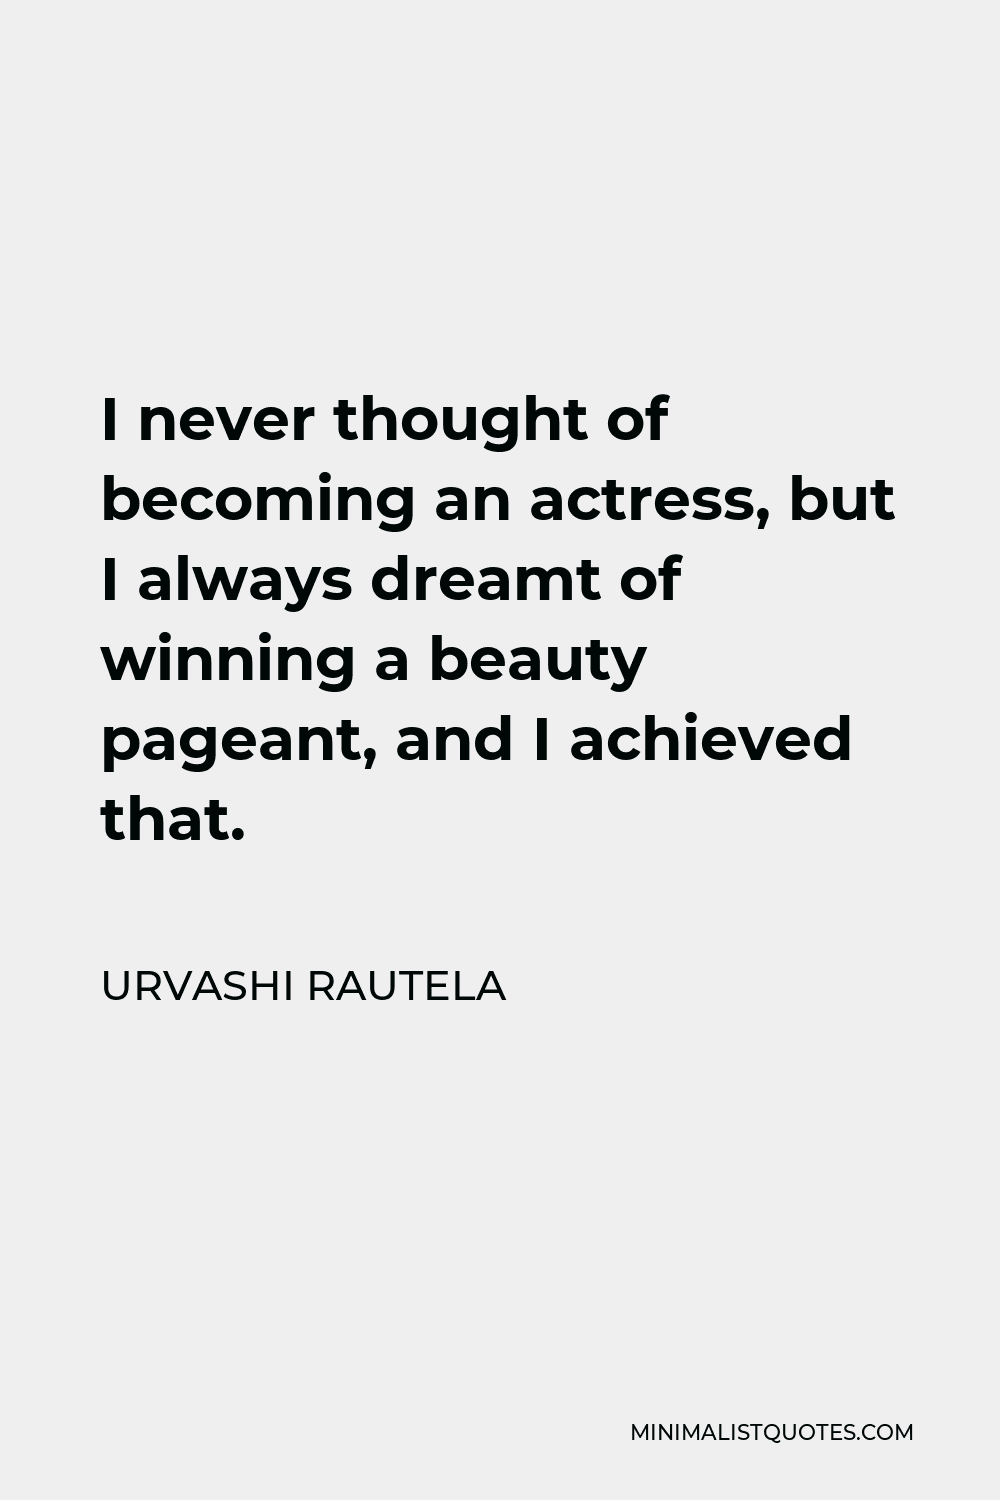 Urvashi Rautela Quote - I never thought of becoming an actress, but I always dreamt of winning a beauty pageant, and I achieved that.